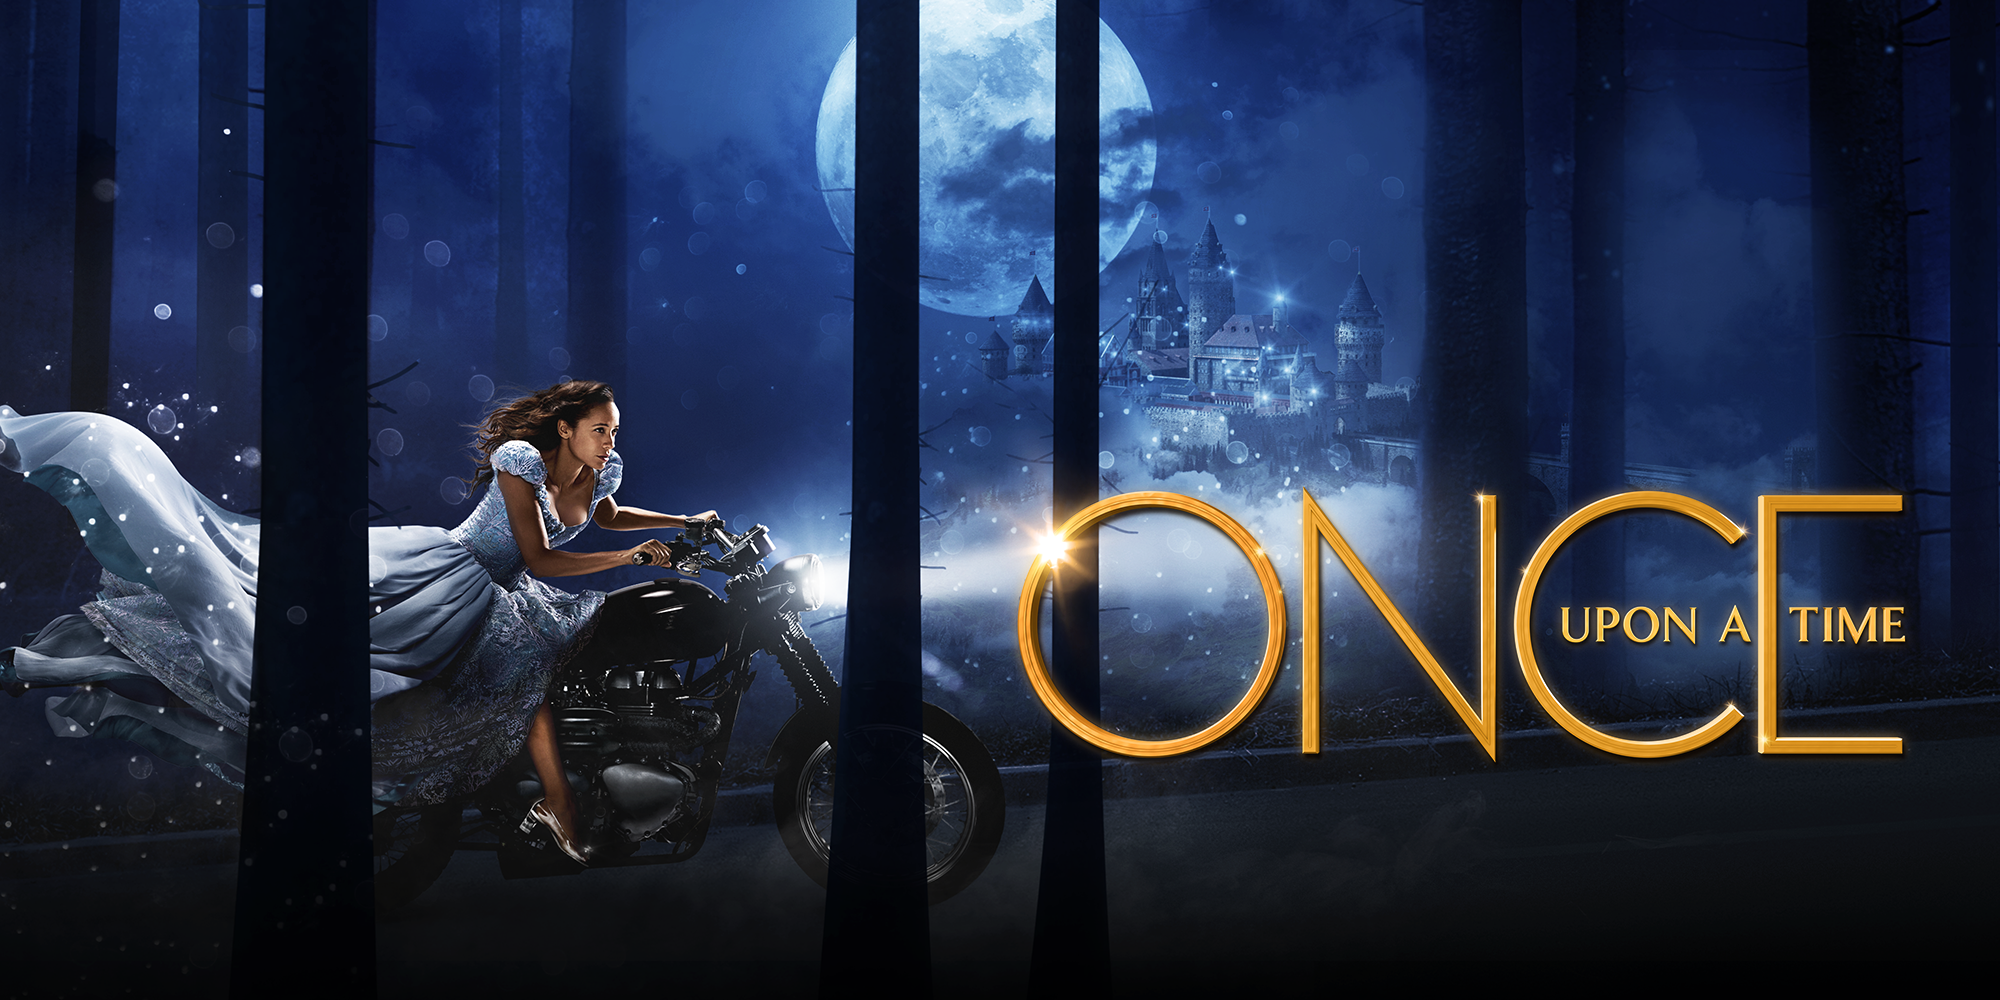 10 Details You Will Only Notice When Rewatching Disney's Once Upon A Time